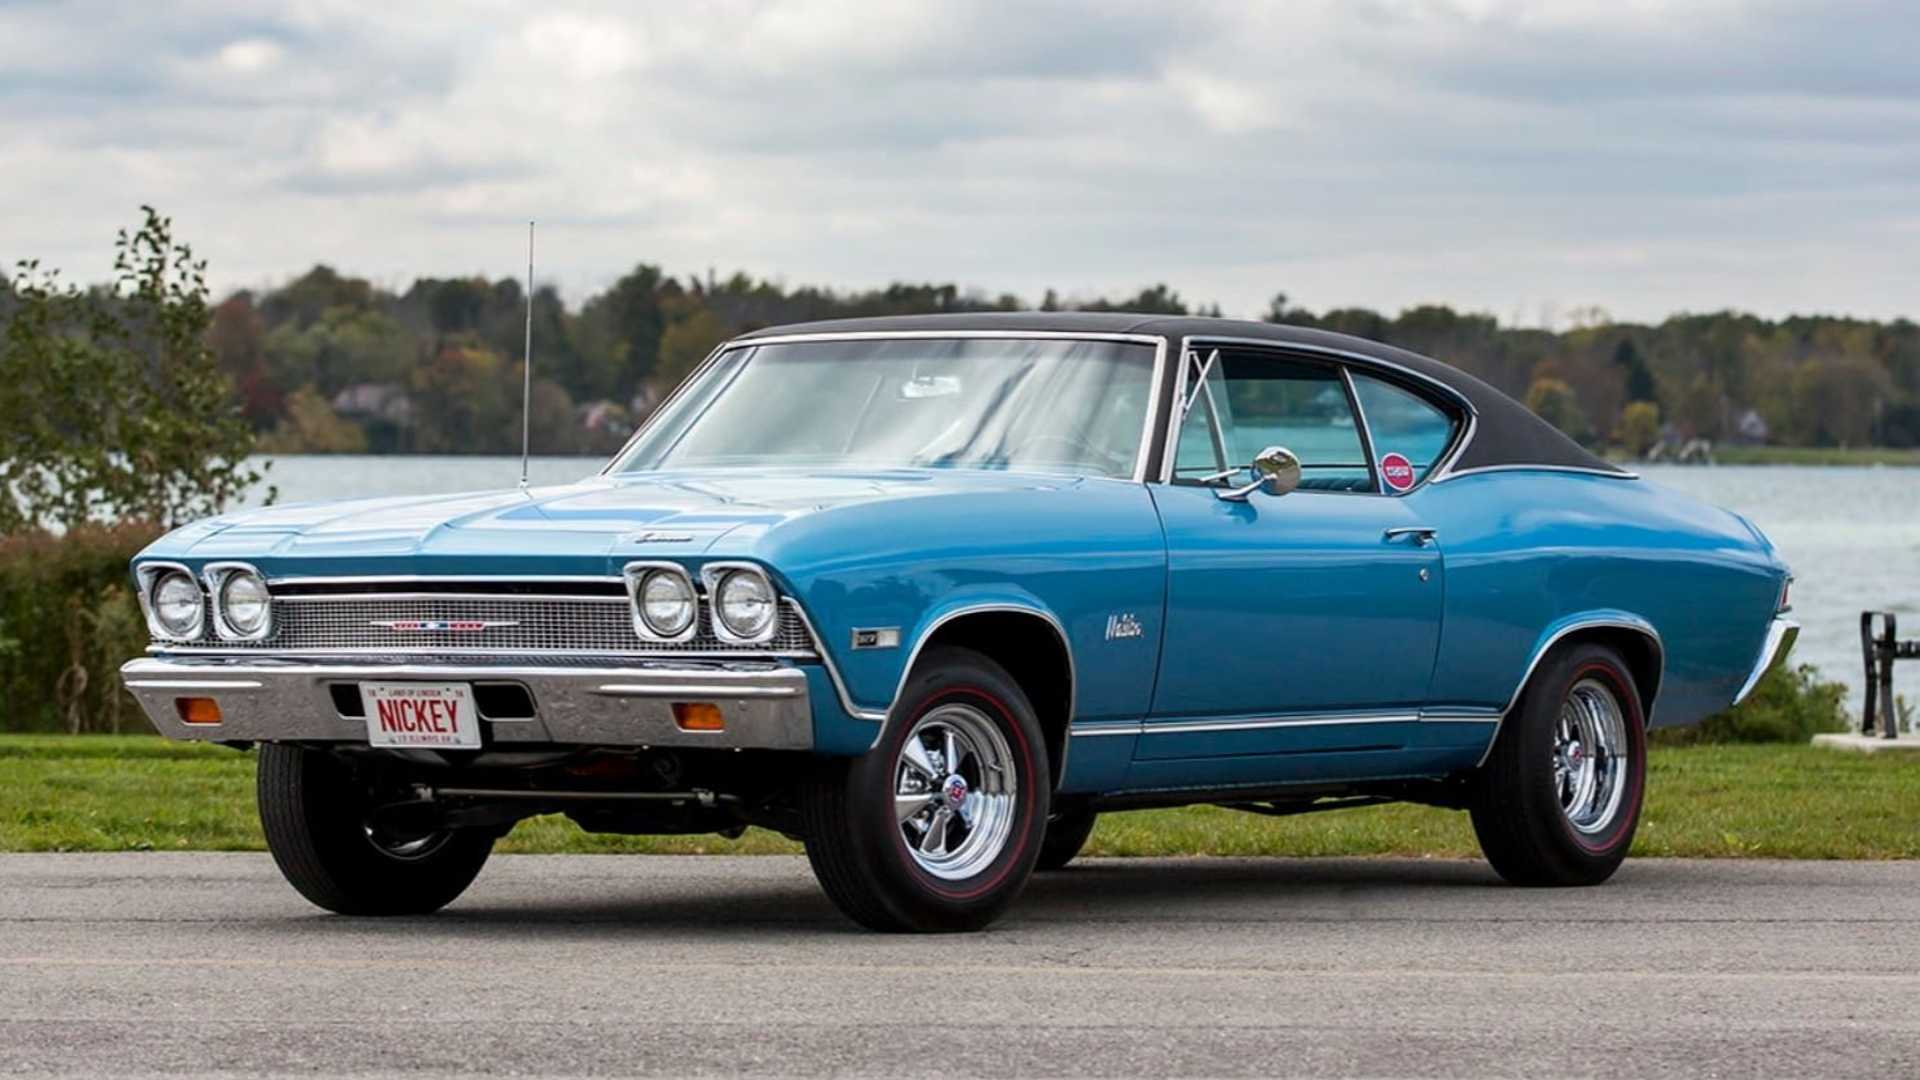 snag-this-1968-chevelle-malibu-sport-coupe-with-nickey-upgrades